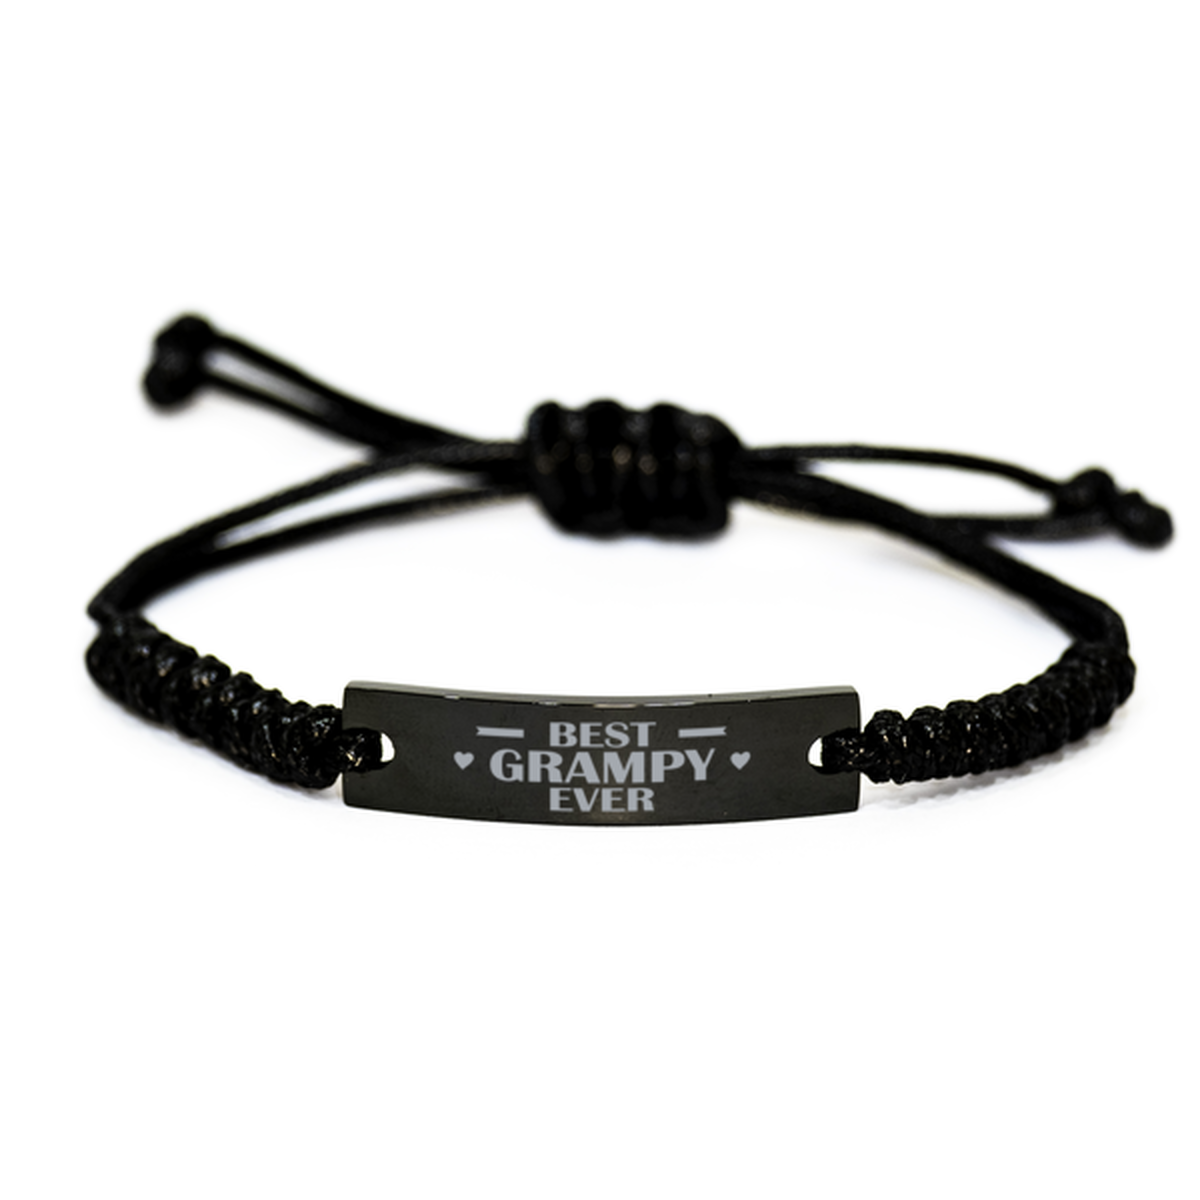 Best Grampy Ever Grampy Gifts, Funny Engraved Rope Bracelet For Grampy, Birthday Family Gifts For Women